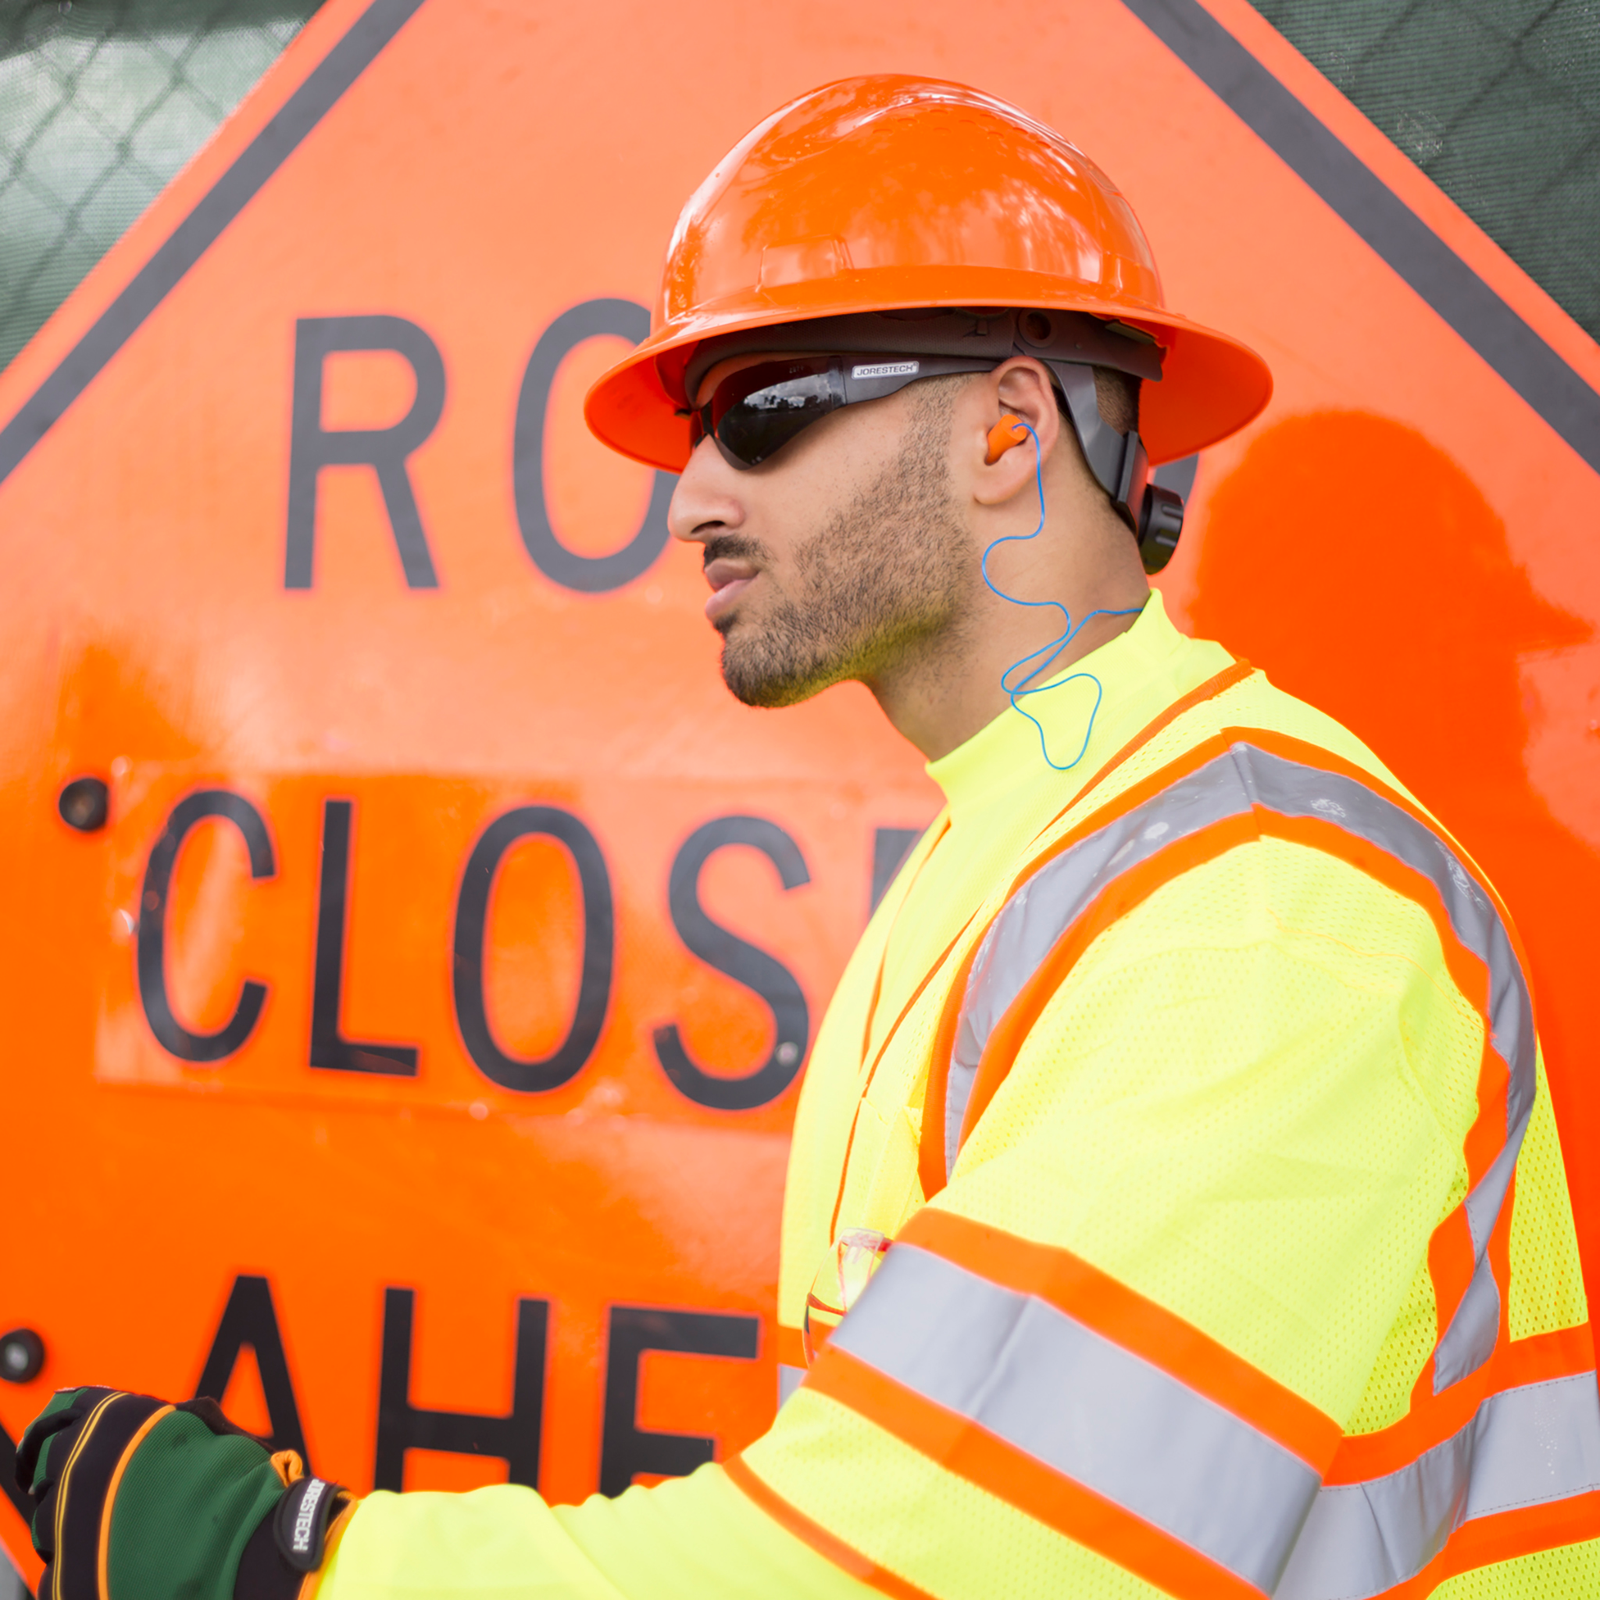 A worker wearing ear plugs for hearing protection and high visibility clothing and hard hat during a road construction